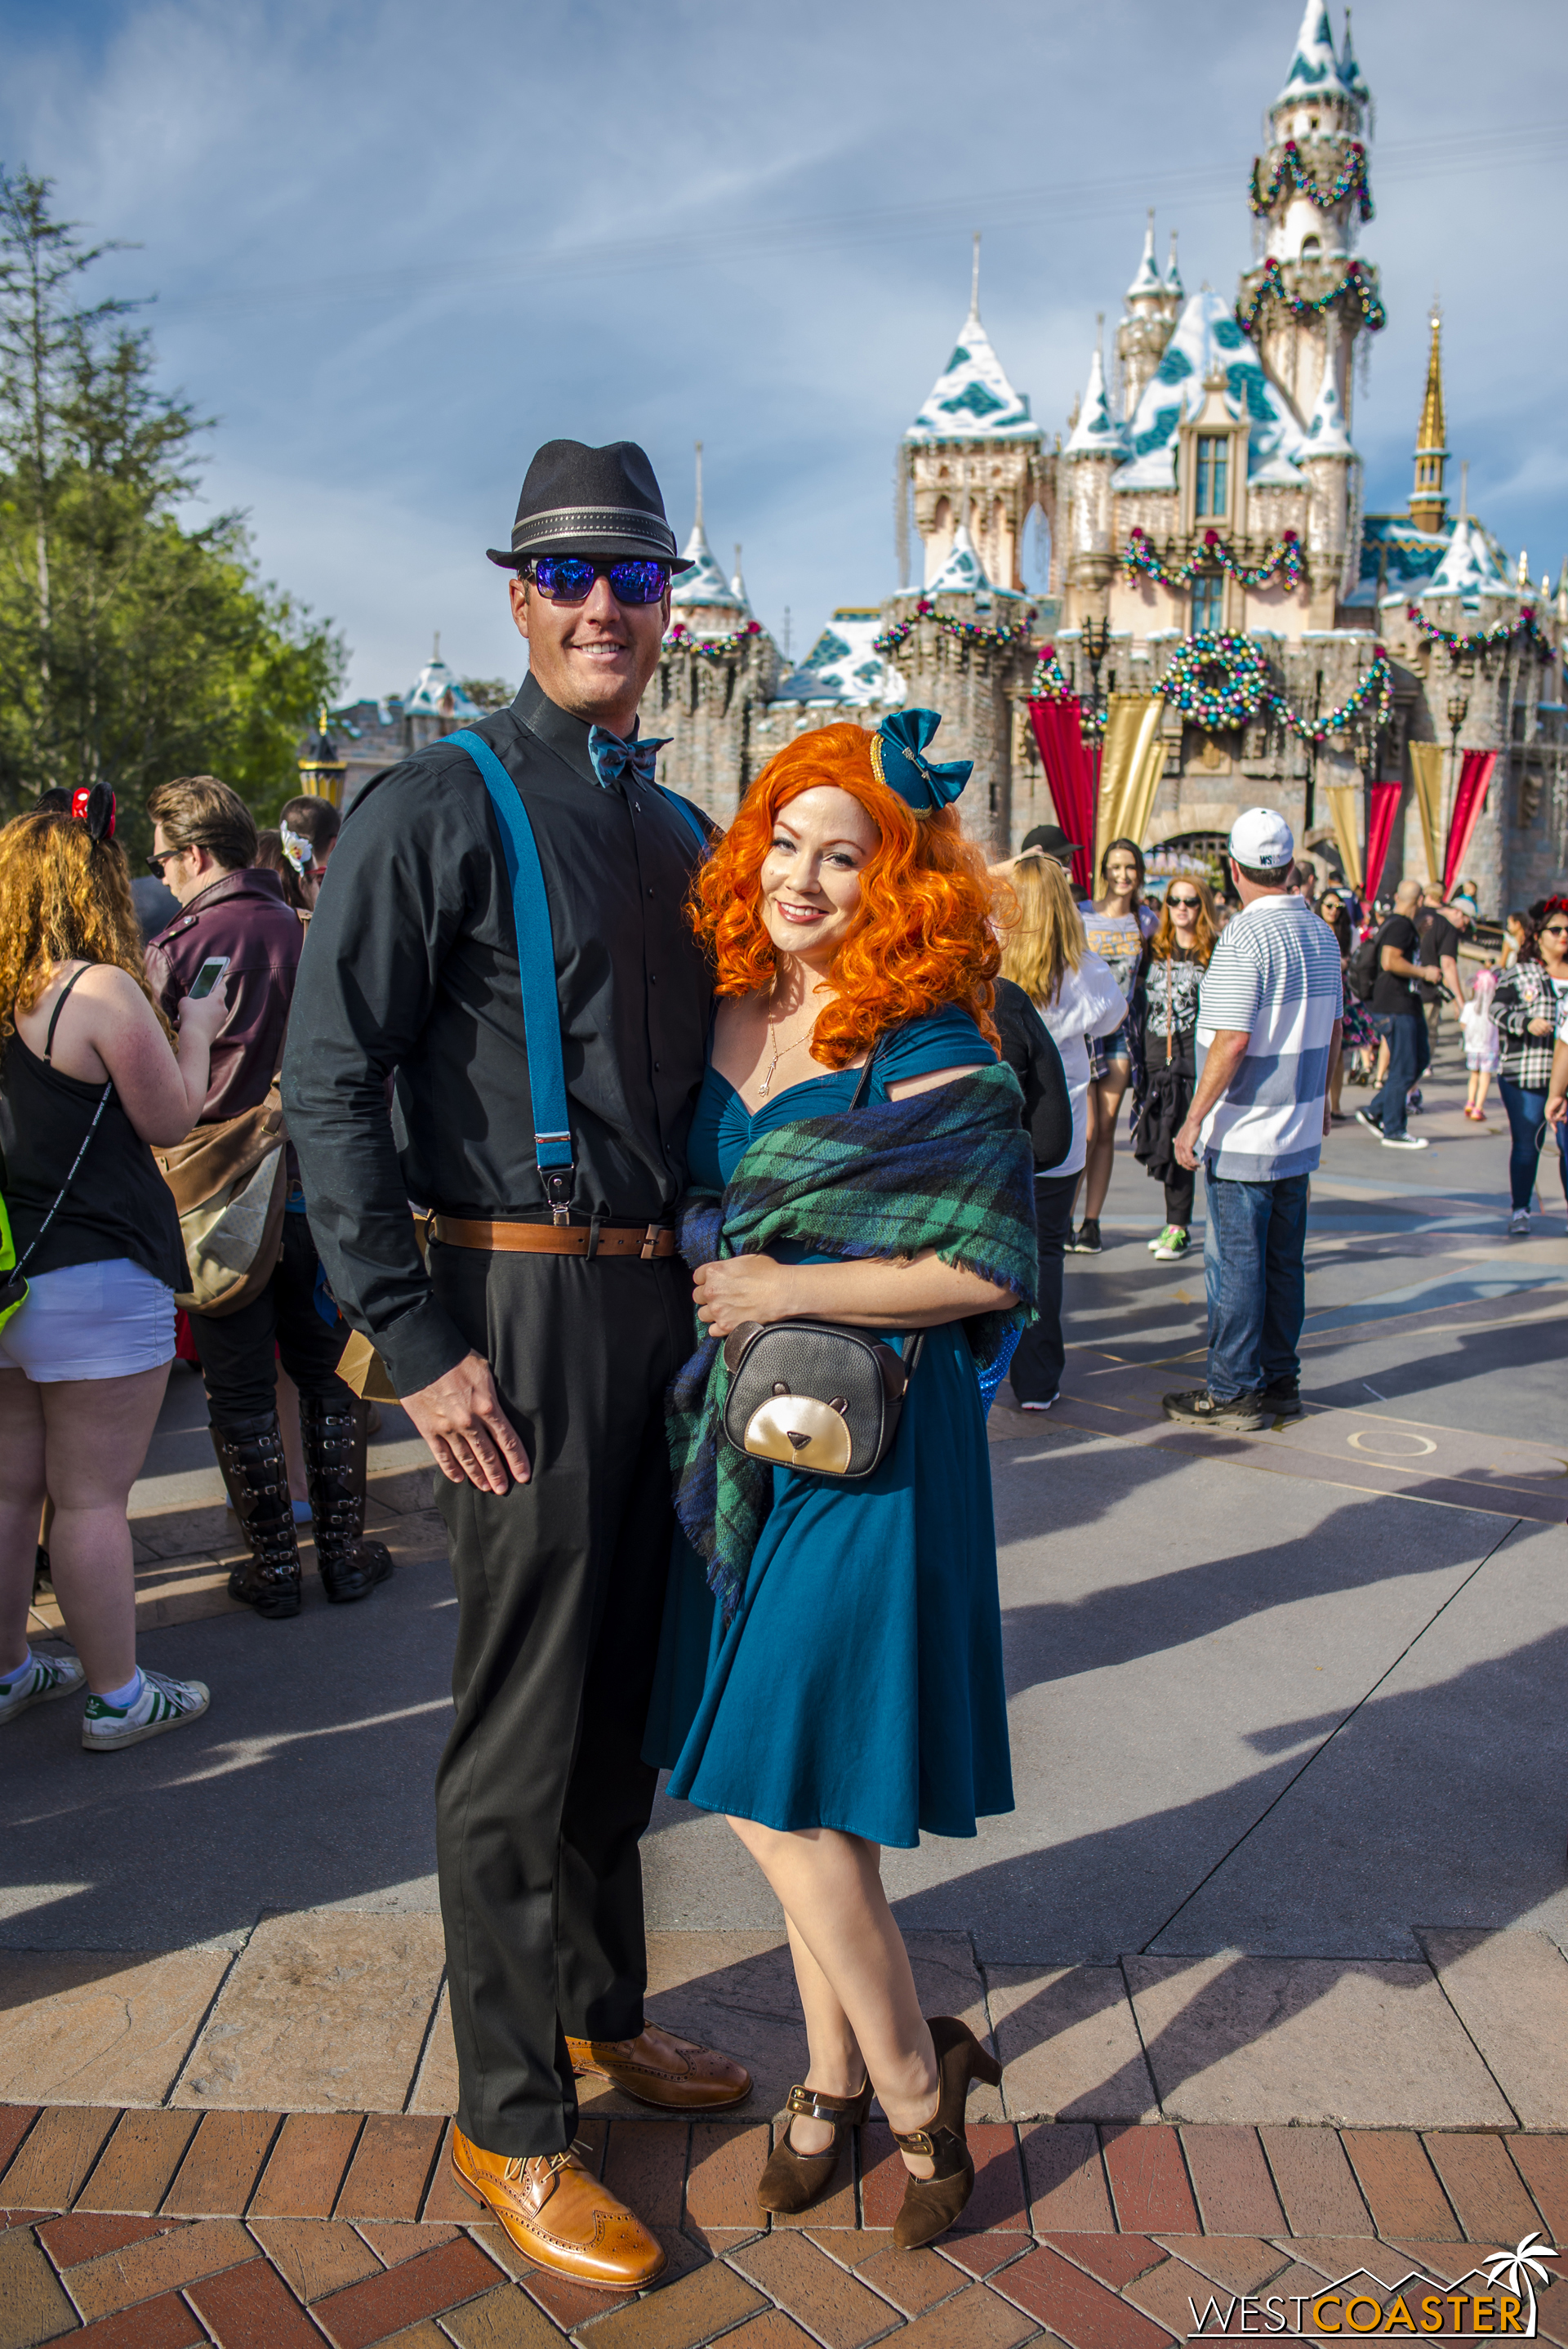  Over in front of Sleeping Beauty Castle, Merida poses with her date. 